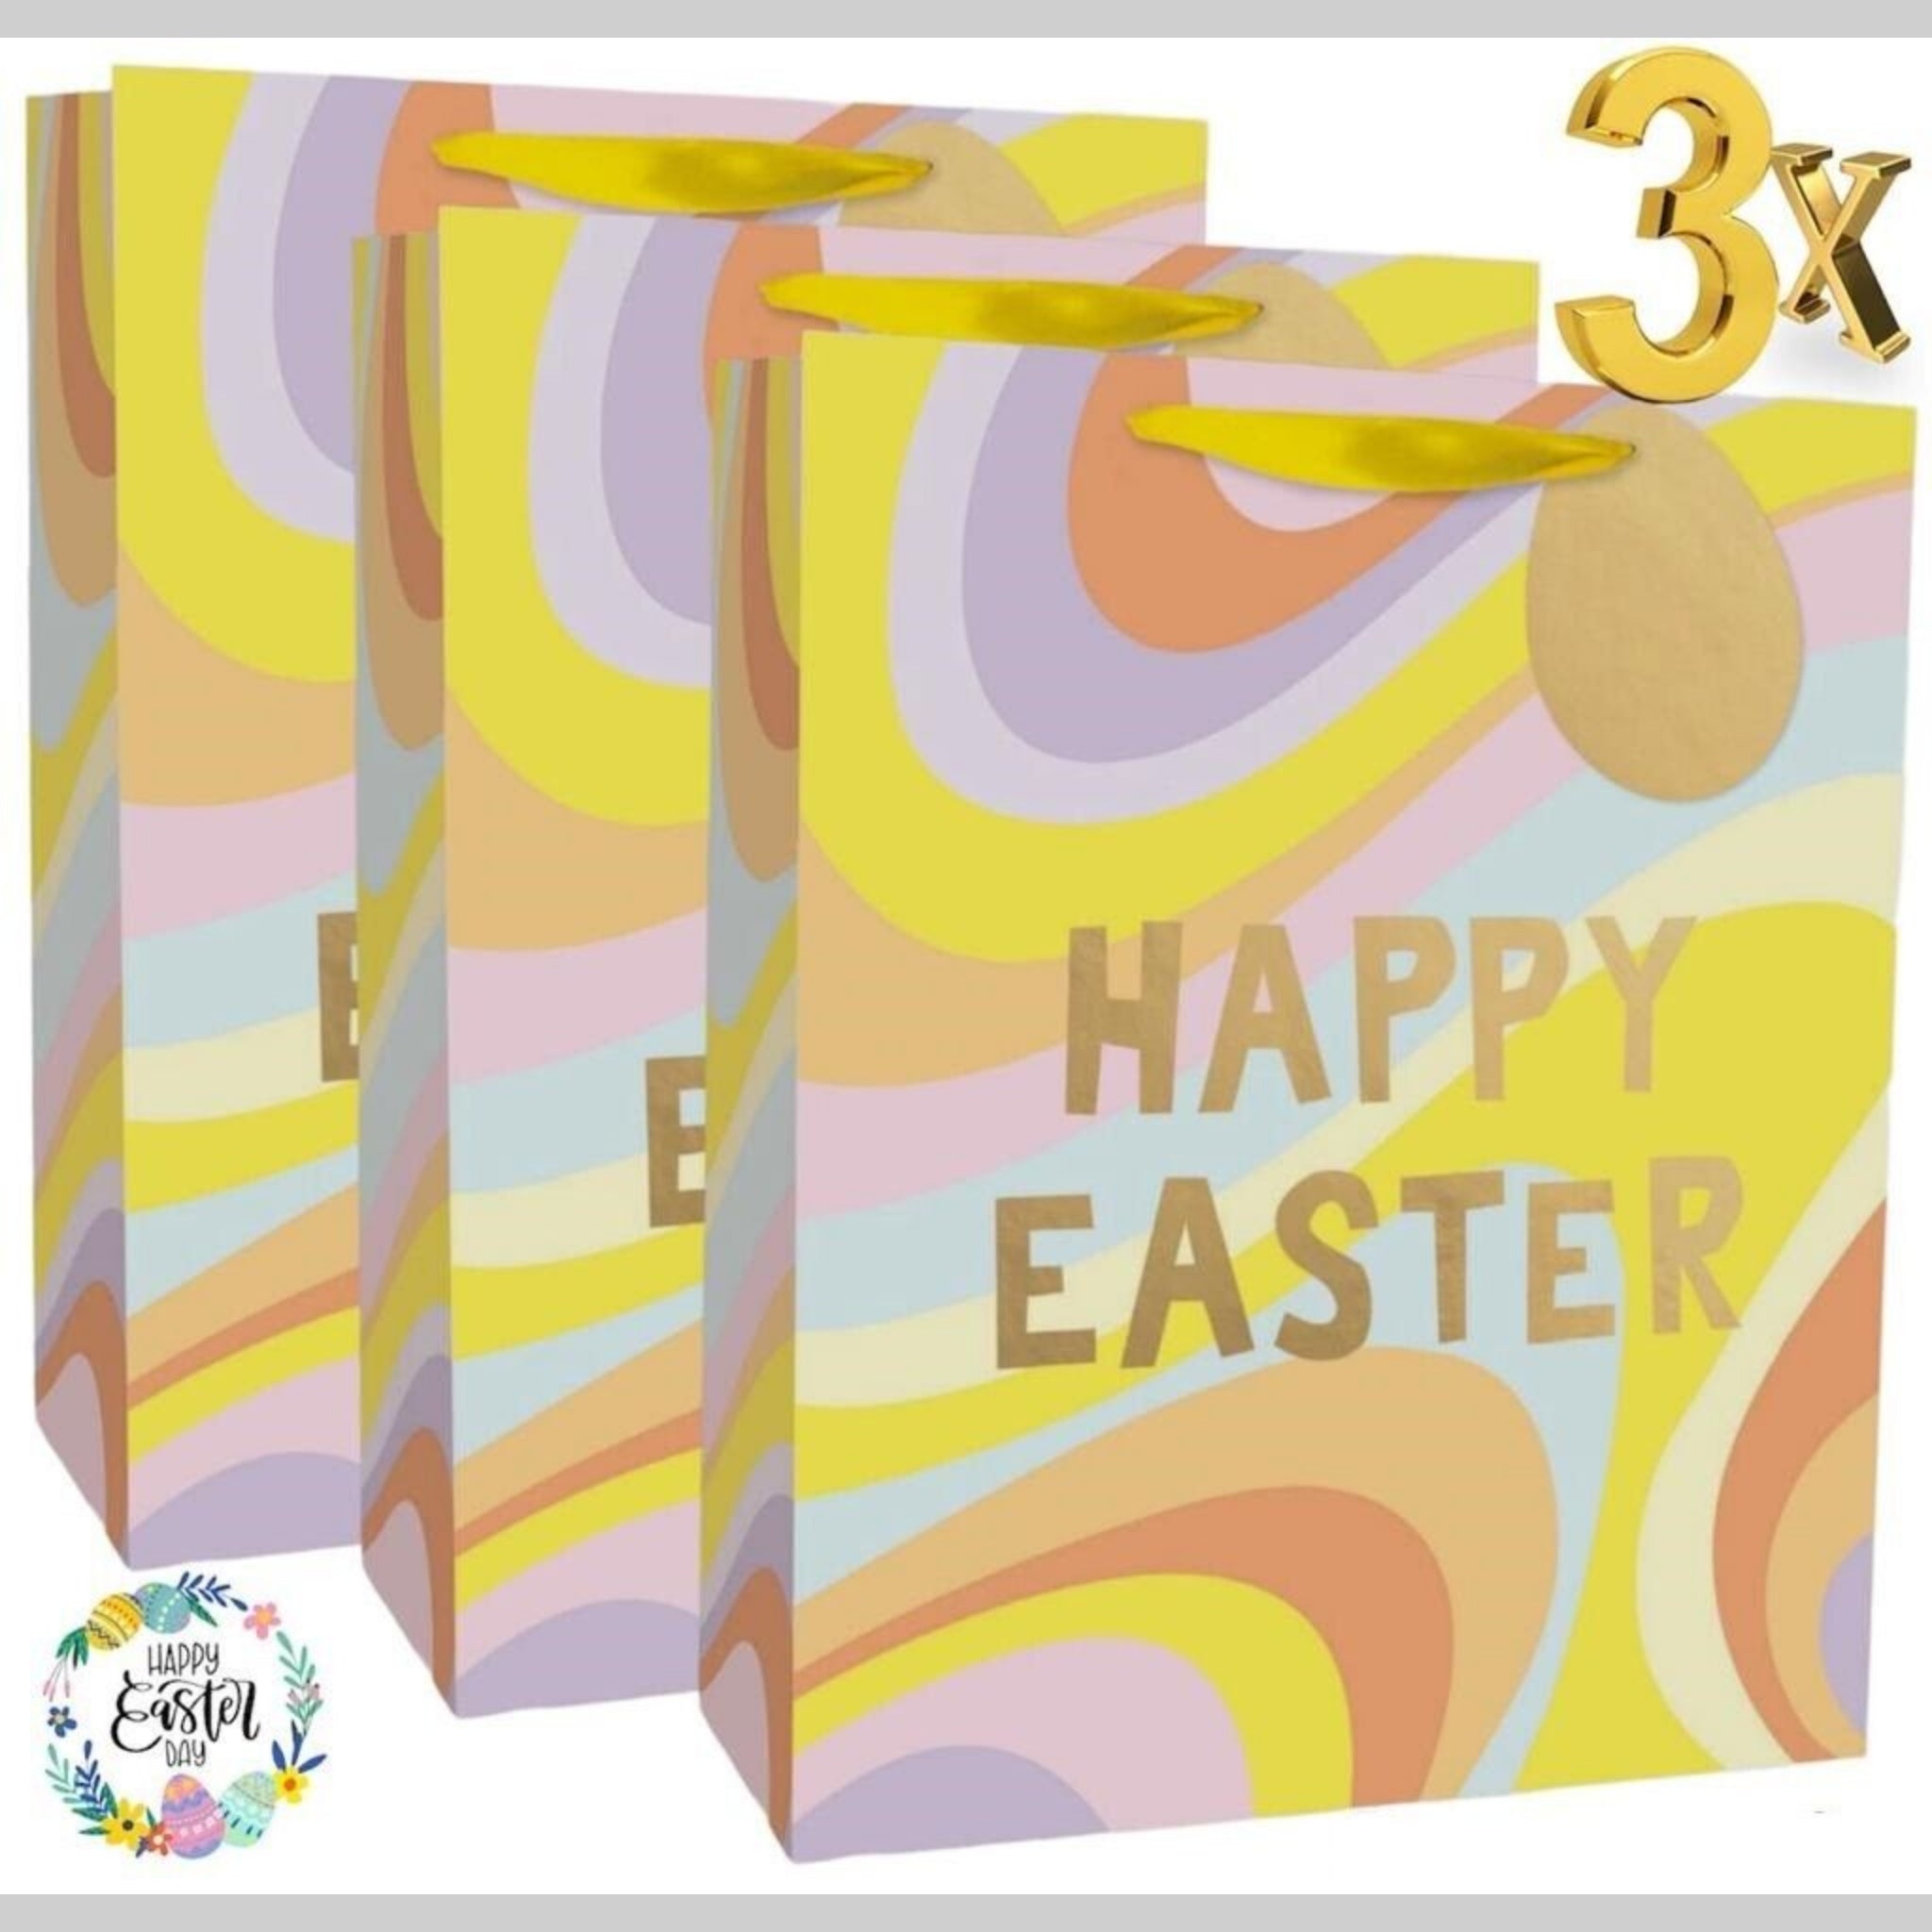 Beclen Harp 3x Large Easter Luxury ''Happy Easter'' Print Gift/Present Bag With Executive Personalized Tag